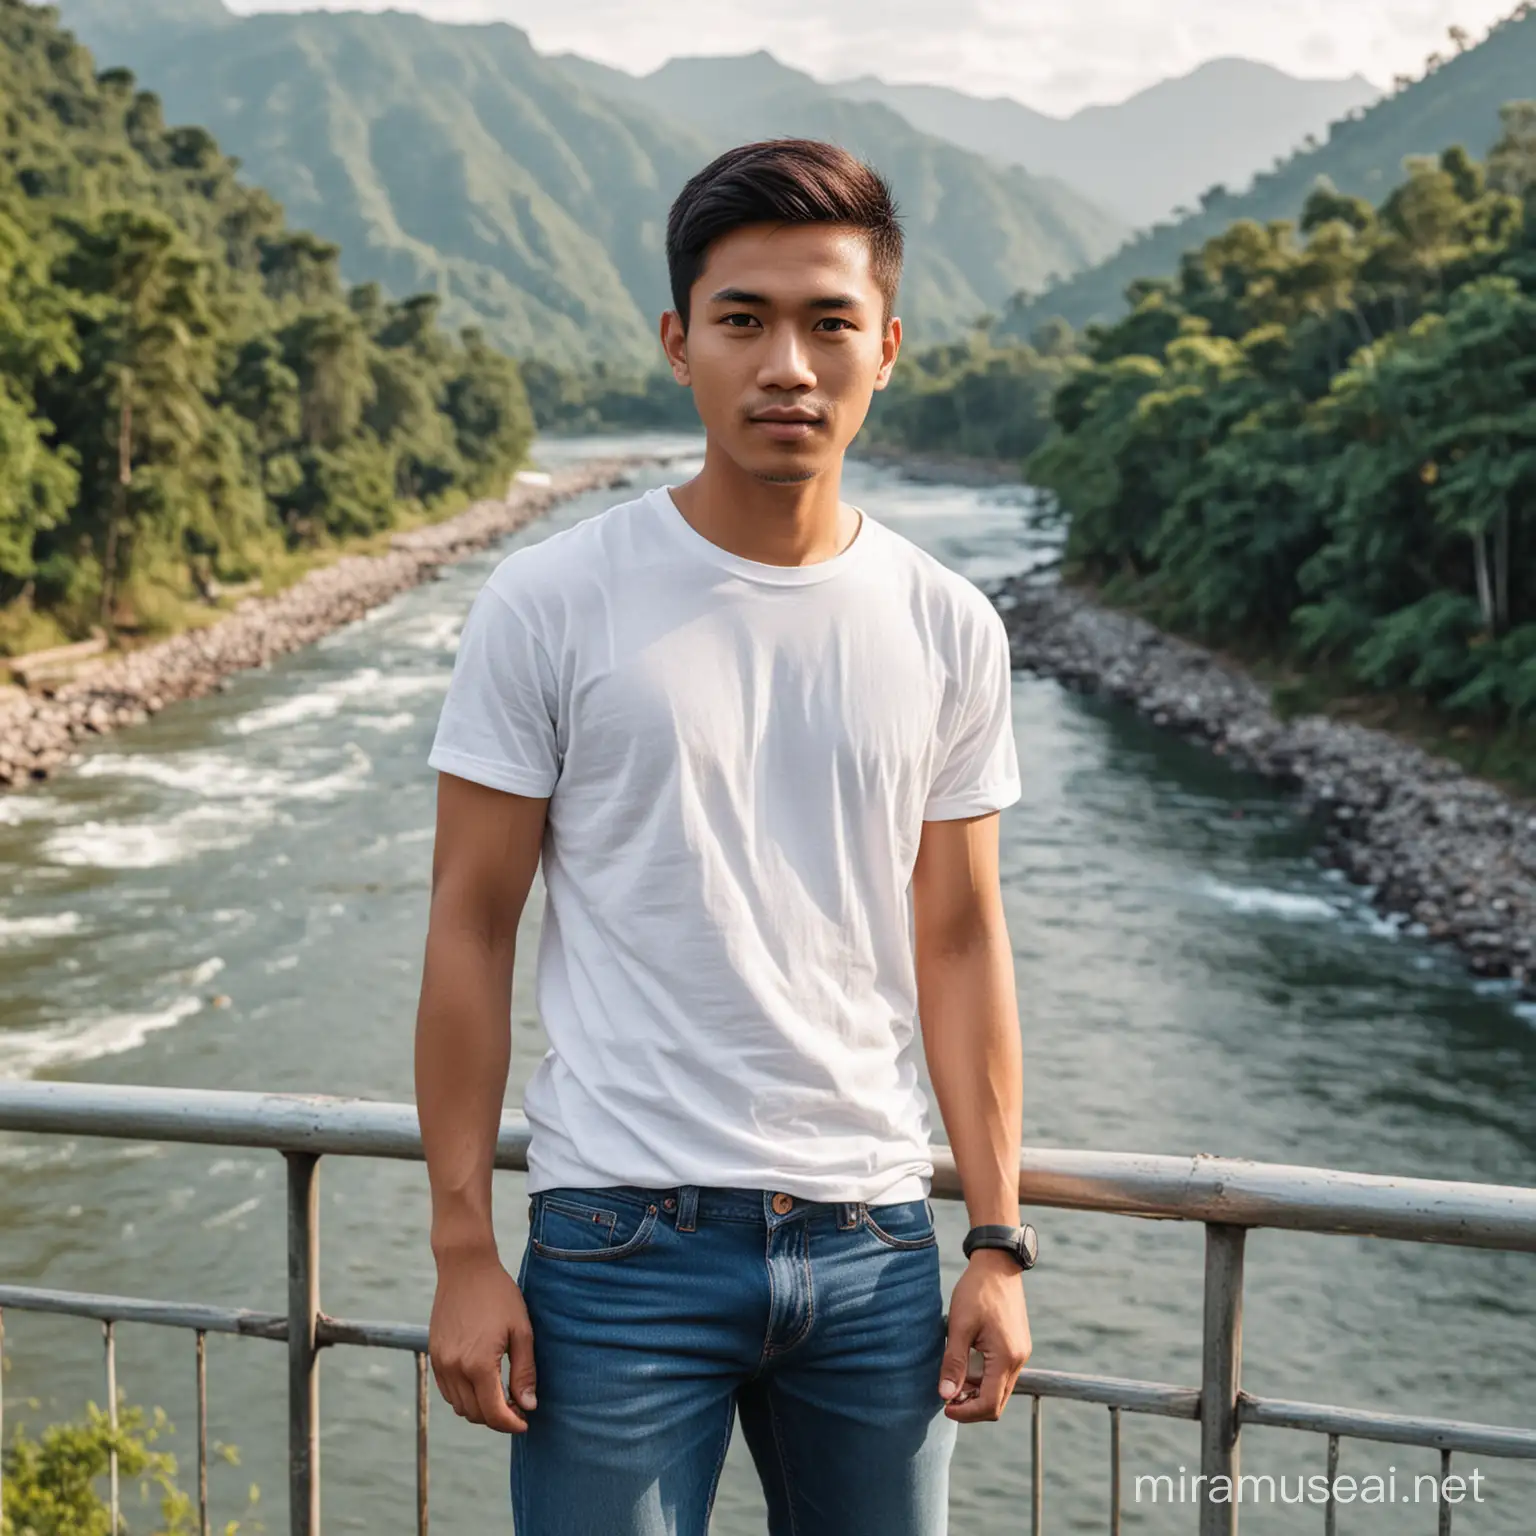 Young Indonesian Man Standing on Bridge Overlooking River and Mountains